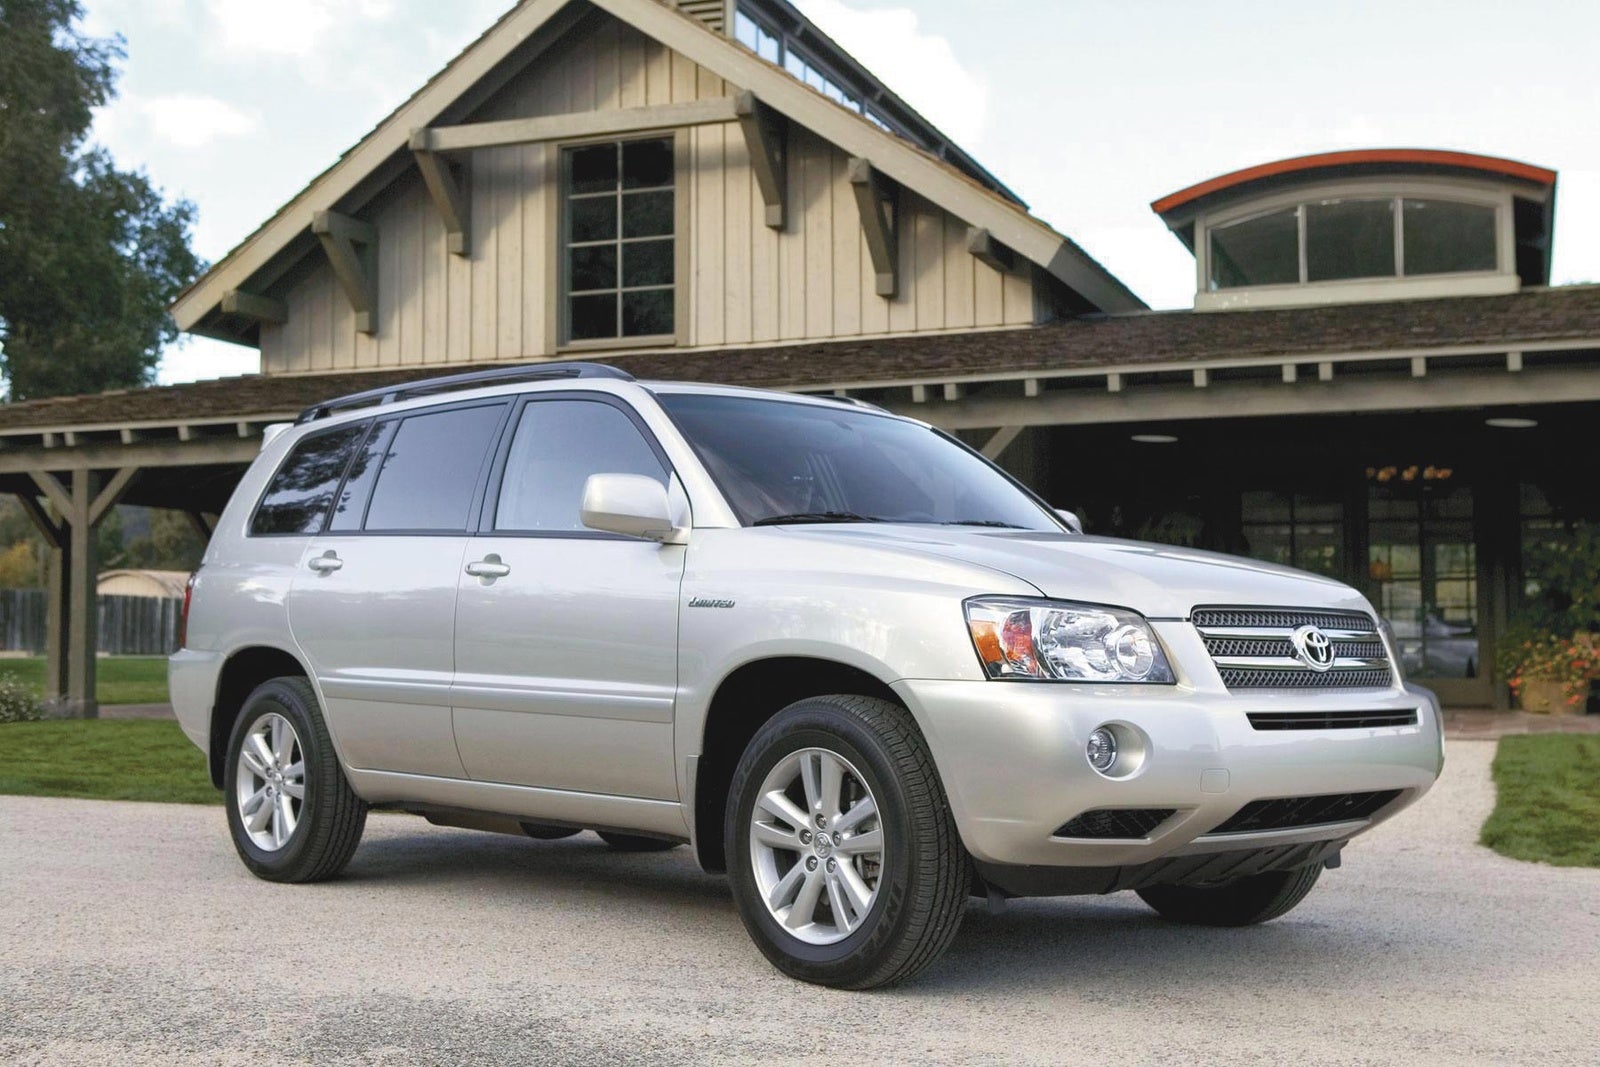 2007 Toyota Highlander Hybrid Limited AWD - Pictures - 2007 Toyota ...